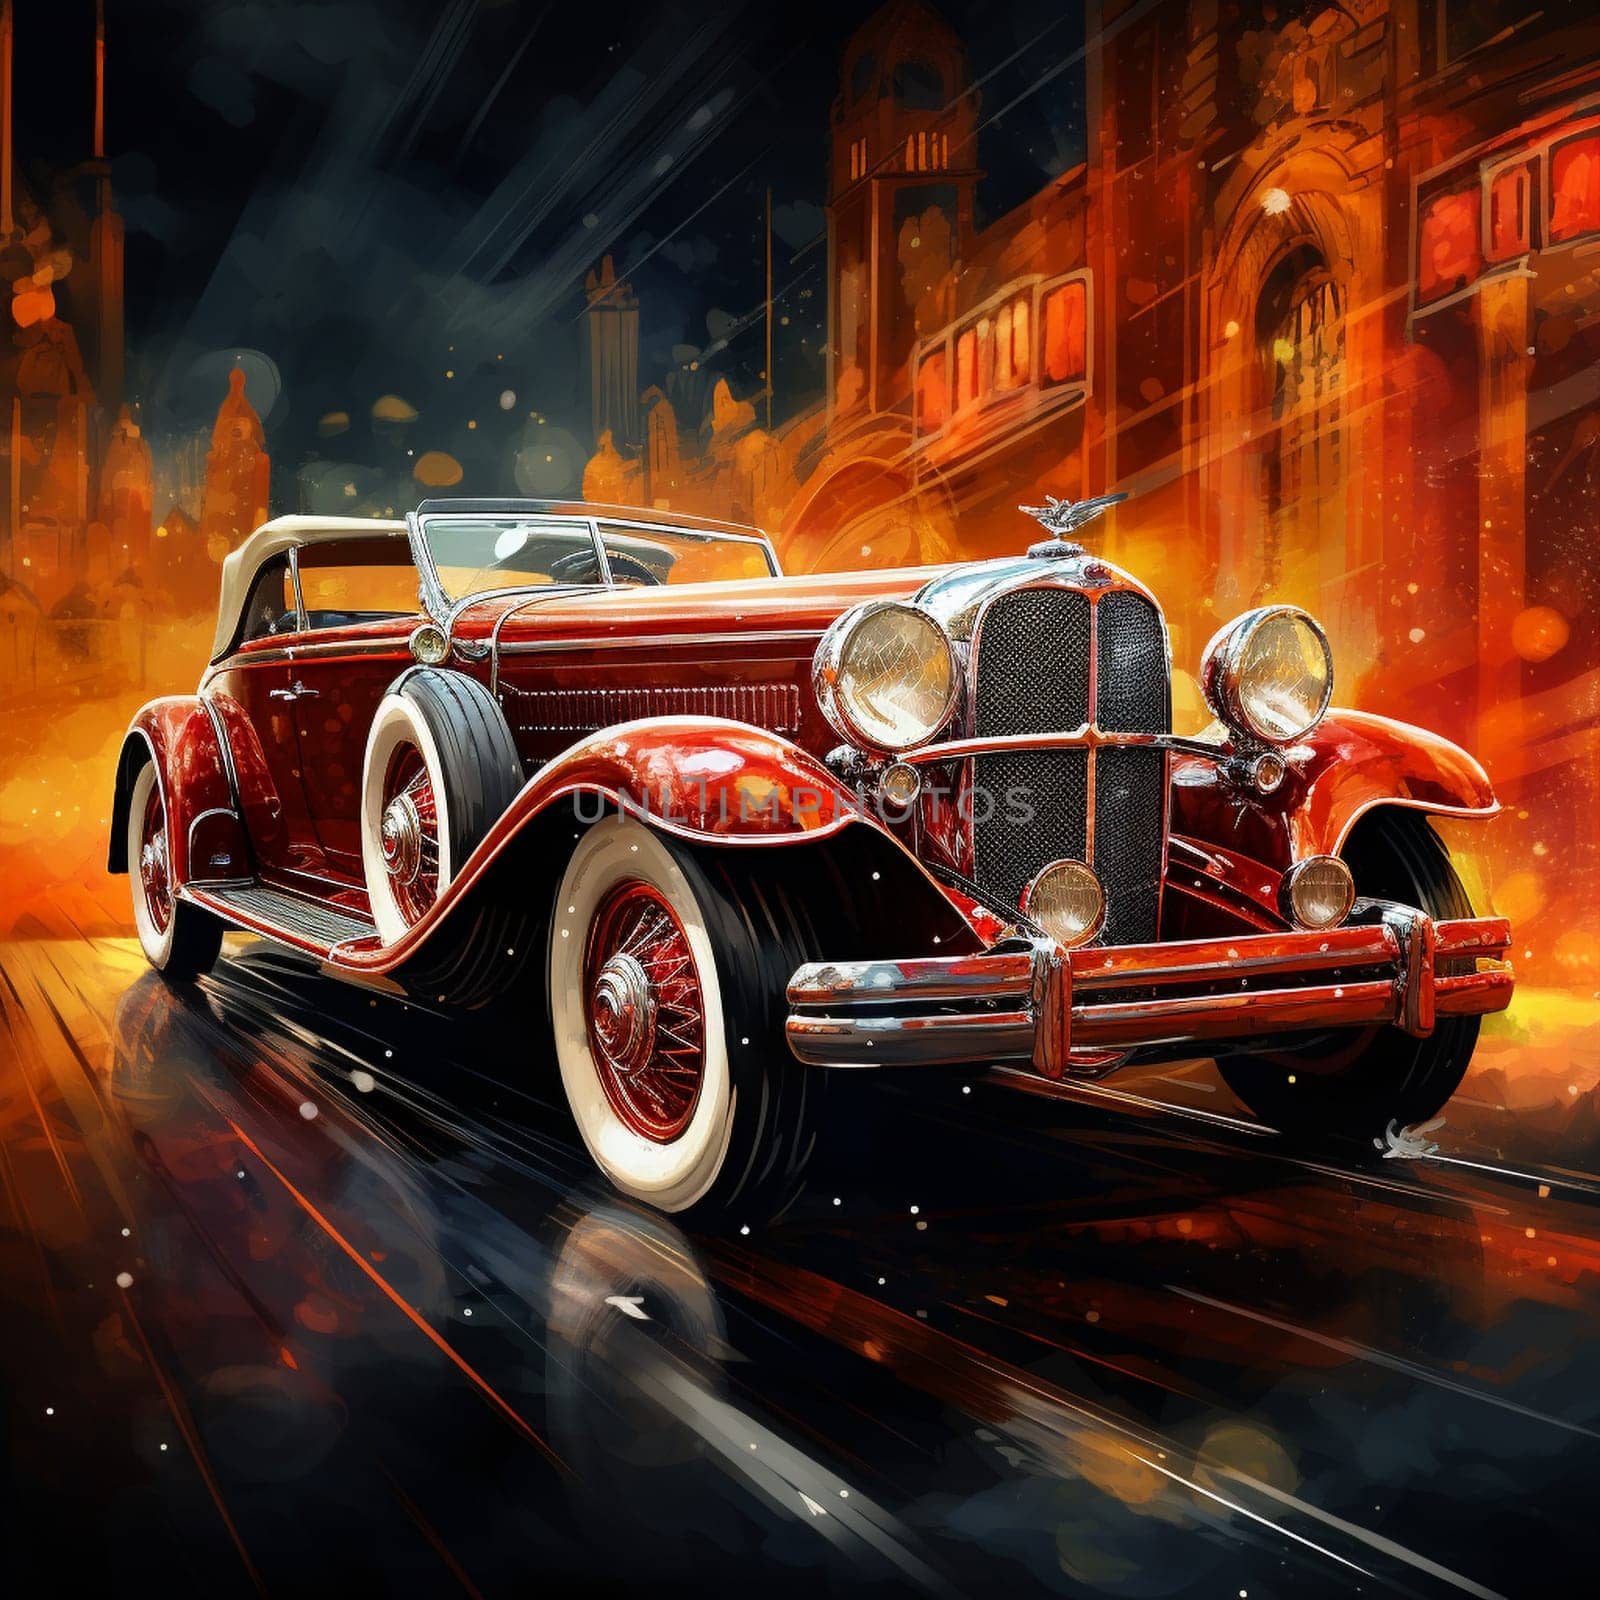 Step back in time with this stunning vintage car captured in a vibrant, retro art style. The artwork beautifully showcases the timeless beauty and allure of this iconic vehicle, creating a symphony of steel that resonates with automotive enthusiasts and art lovers alike.